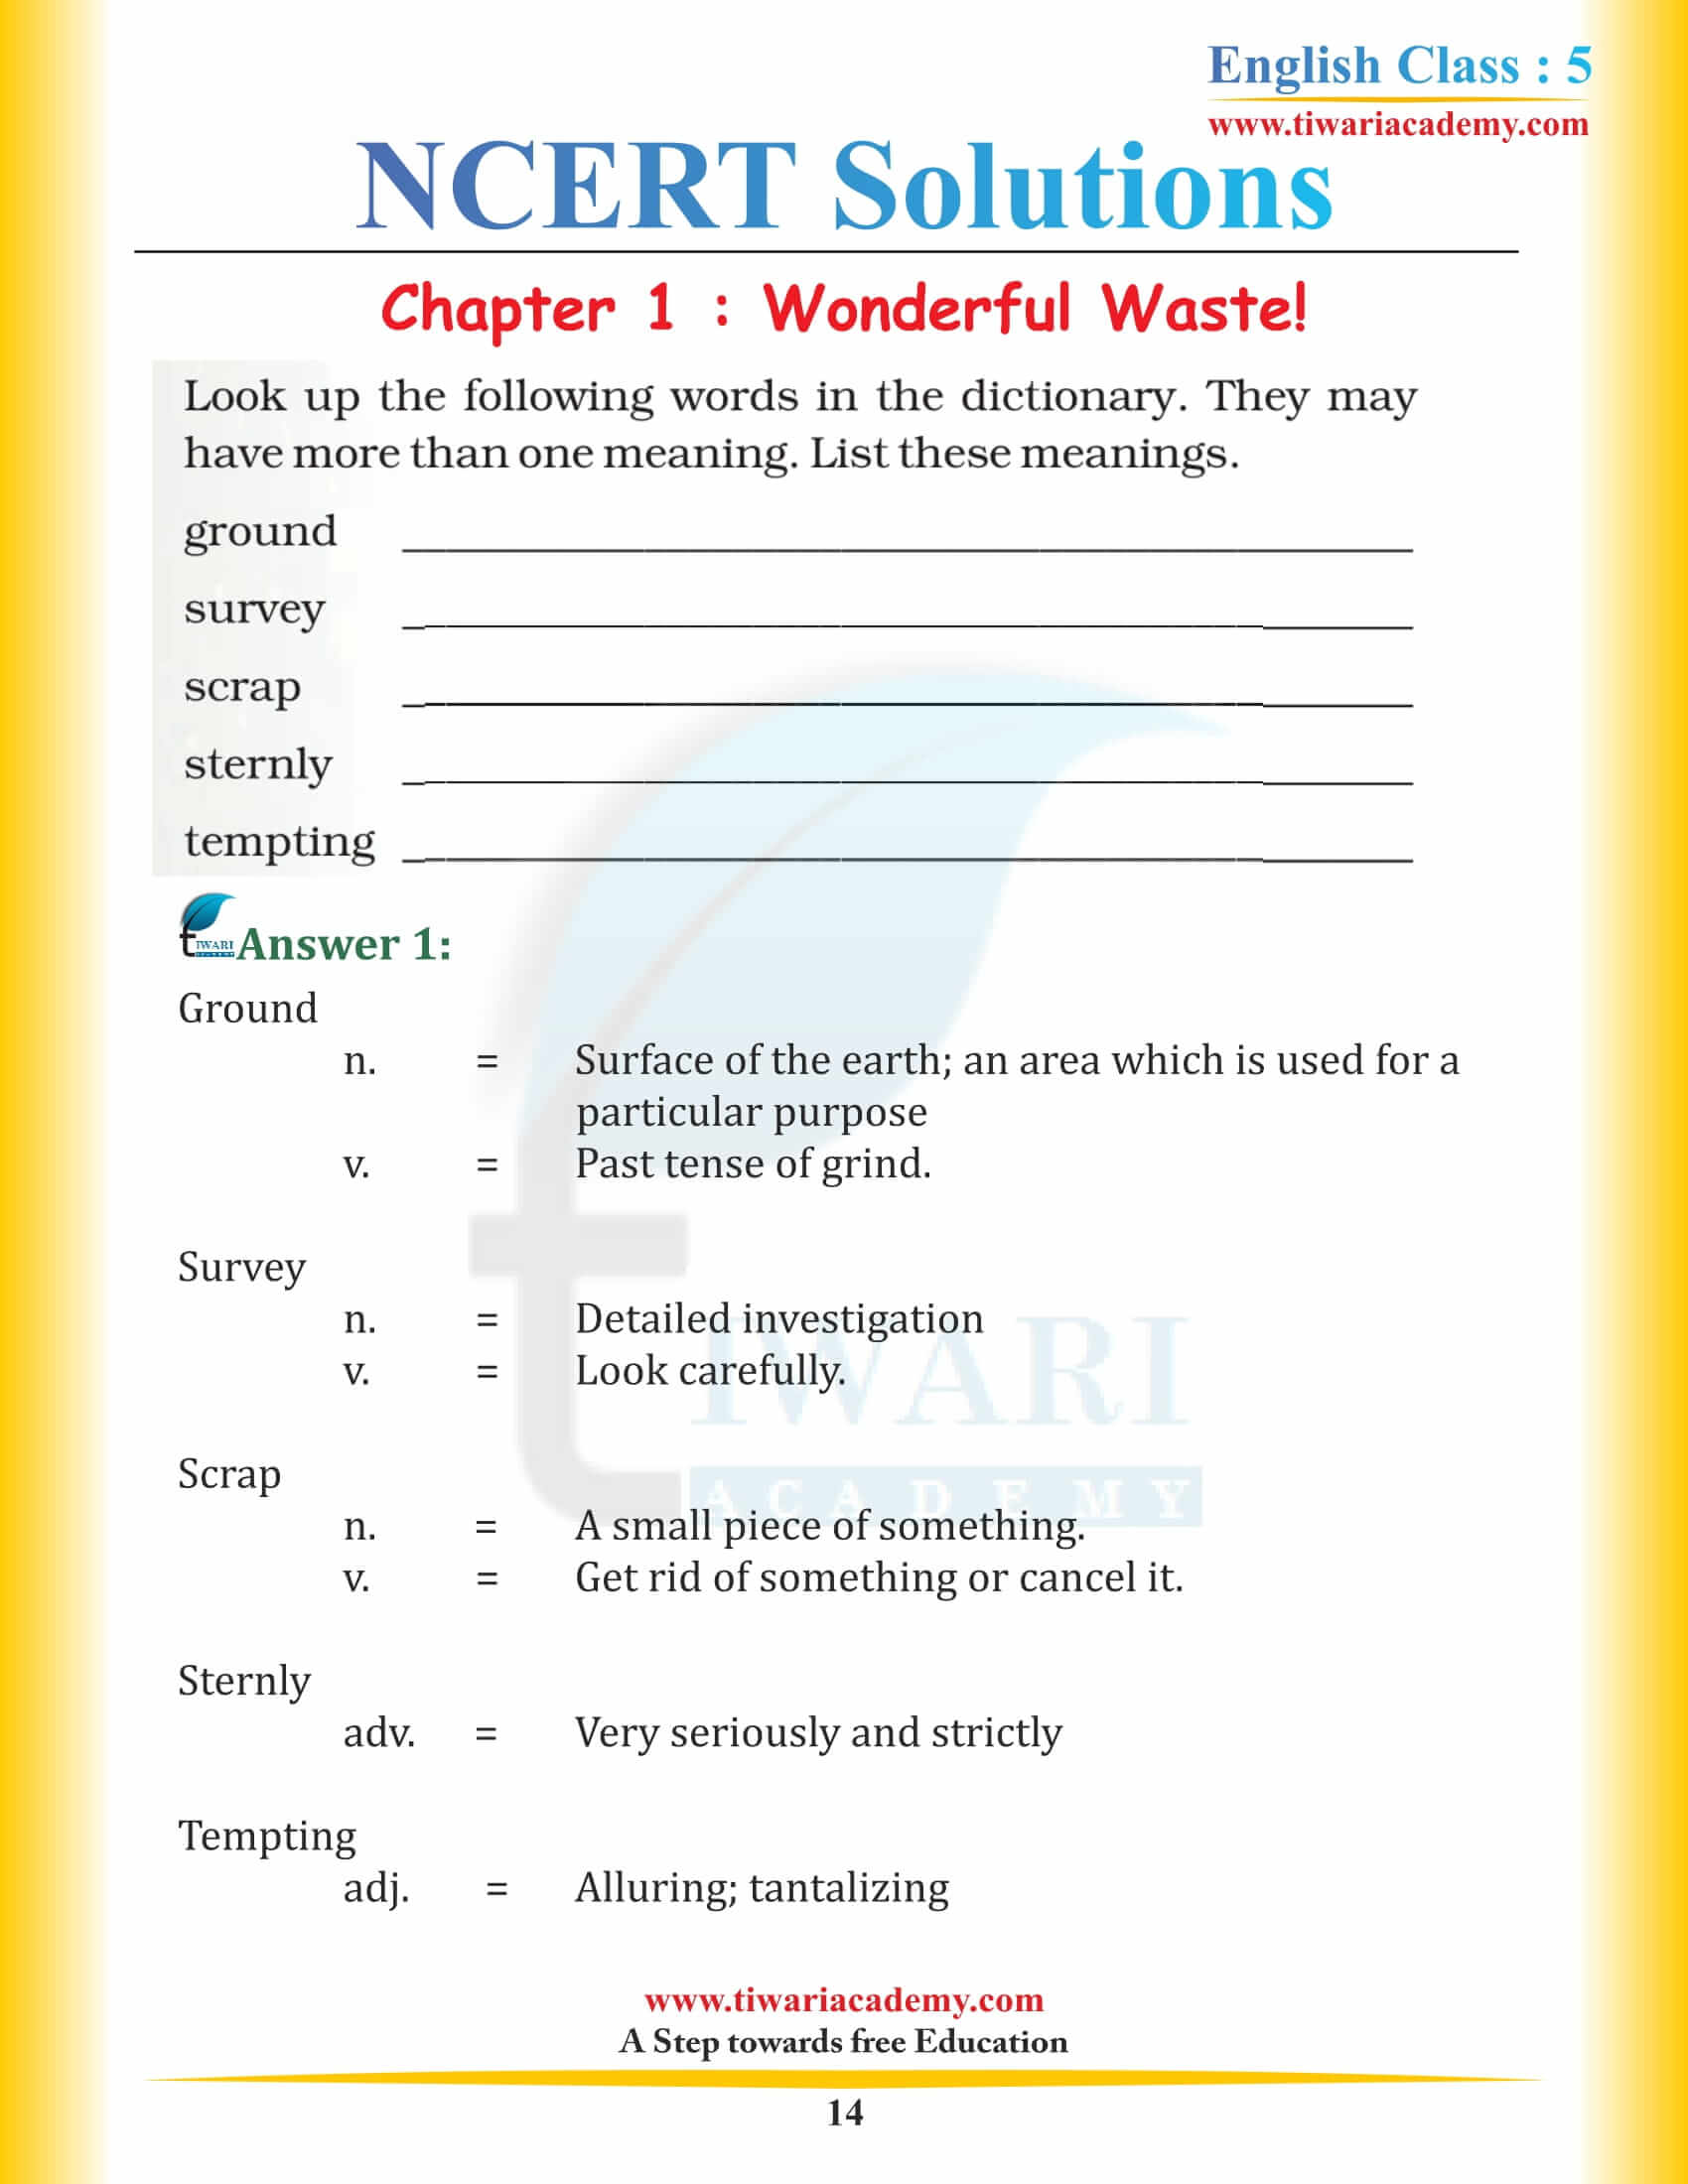 NCERT Solutions for Class 5 English Chapter 1 Wonderful Waste q and a